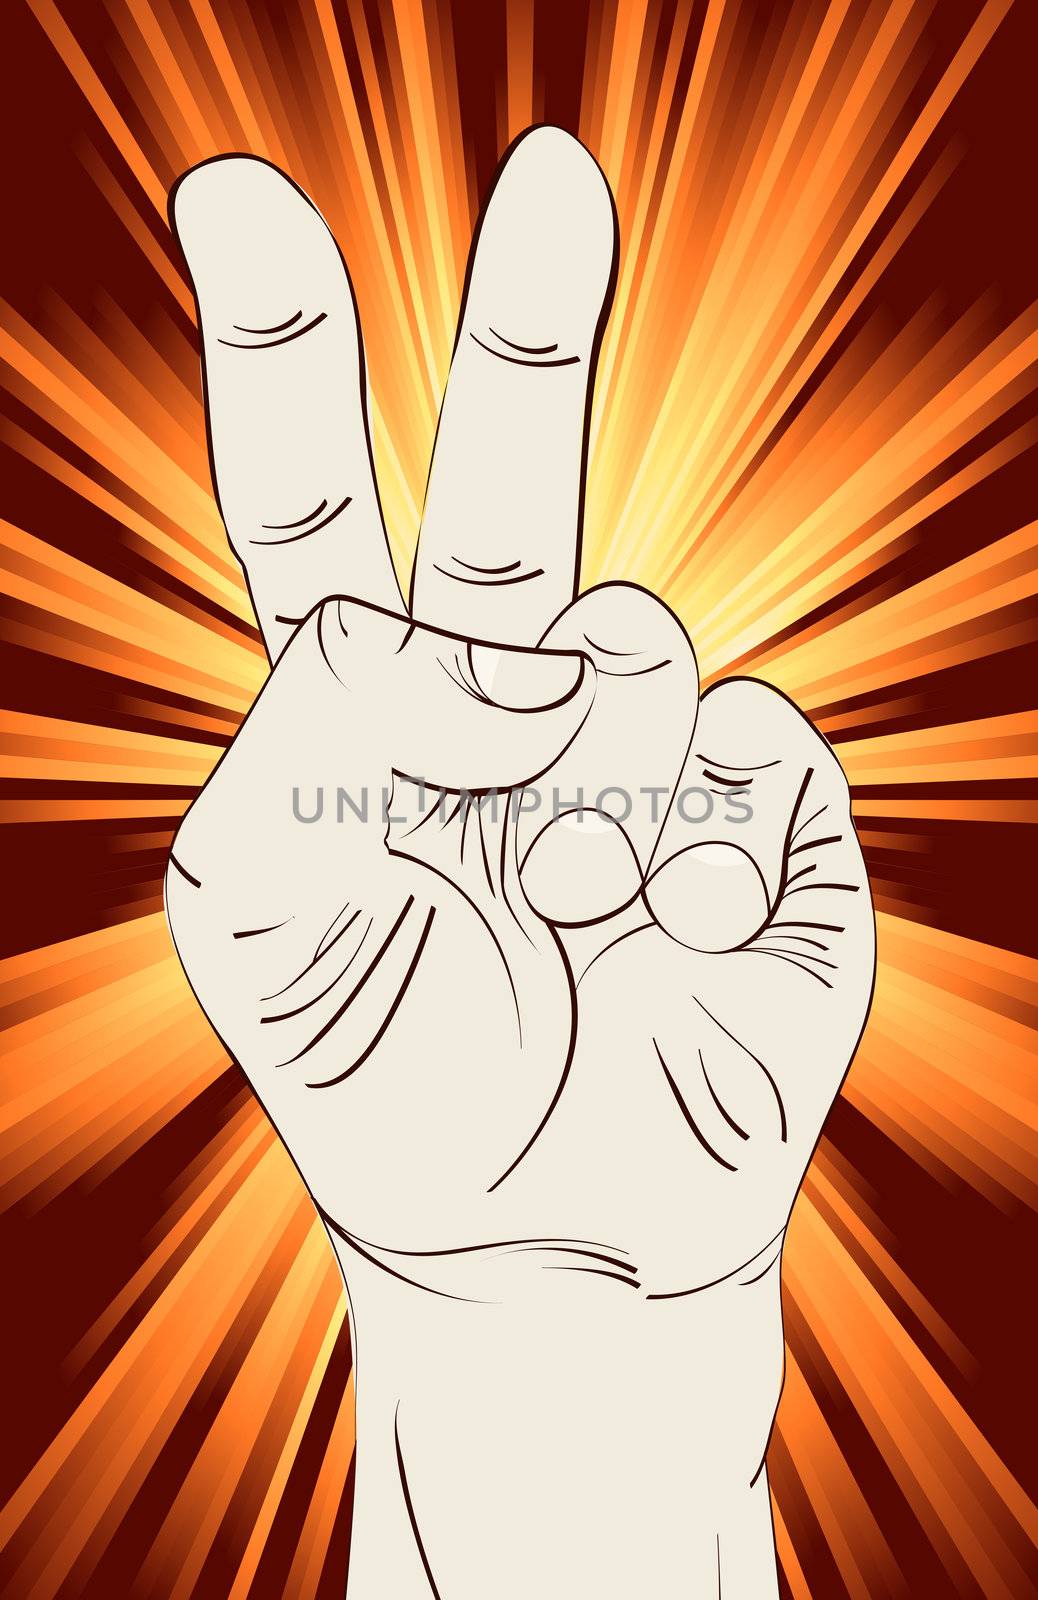 Victory hand sign by Lirch